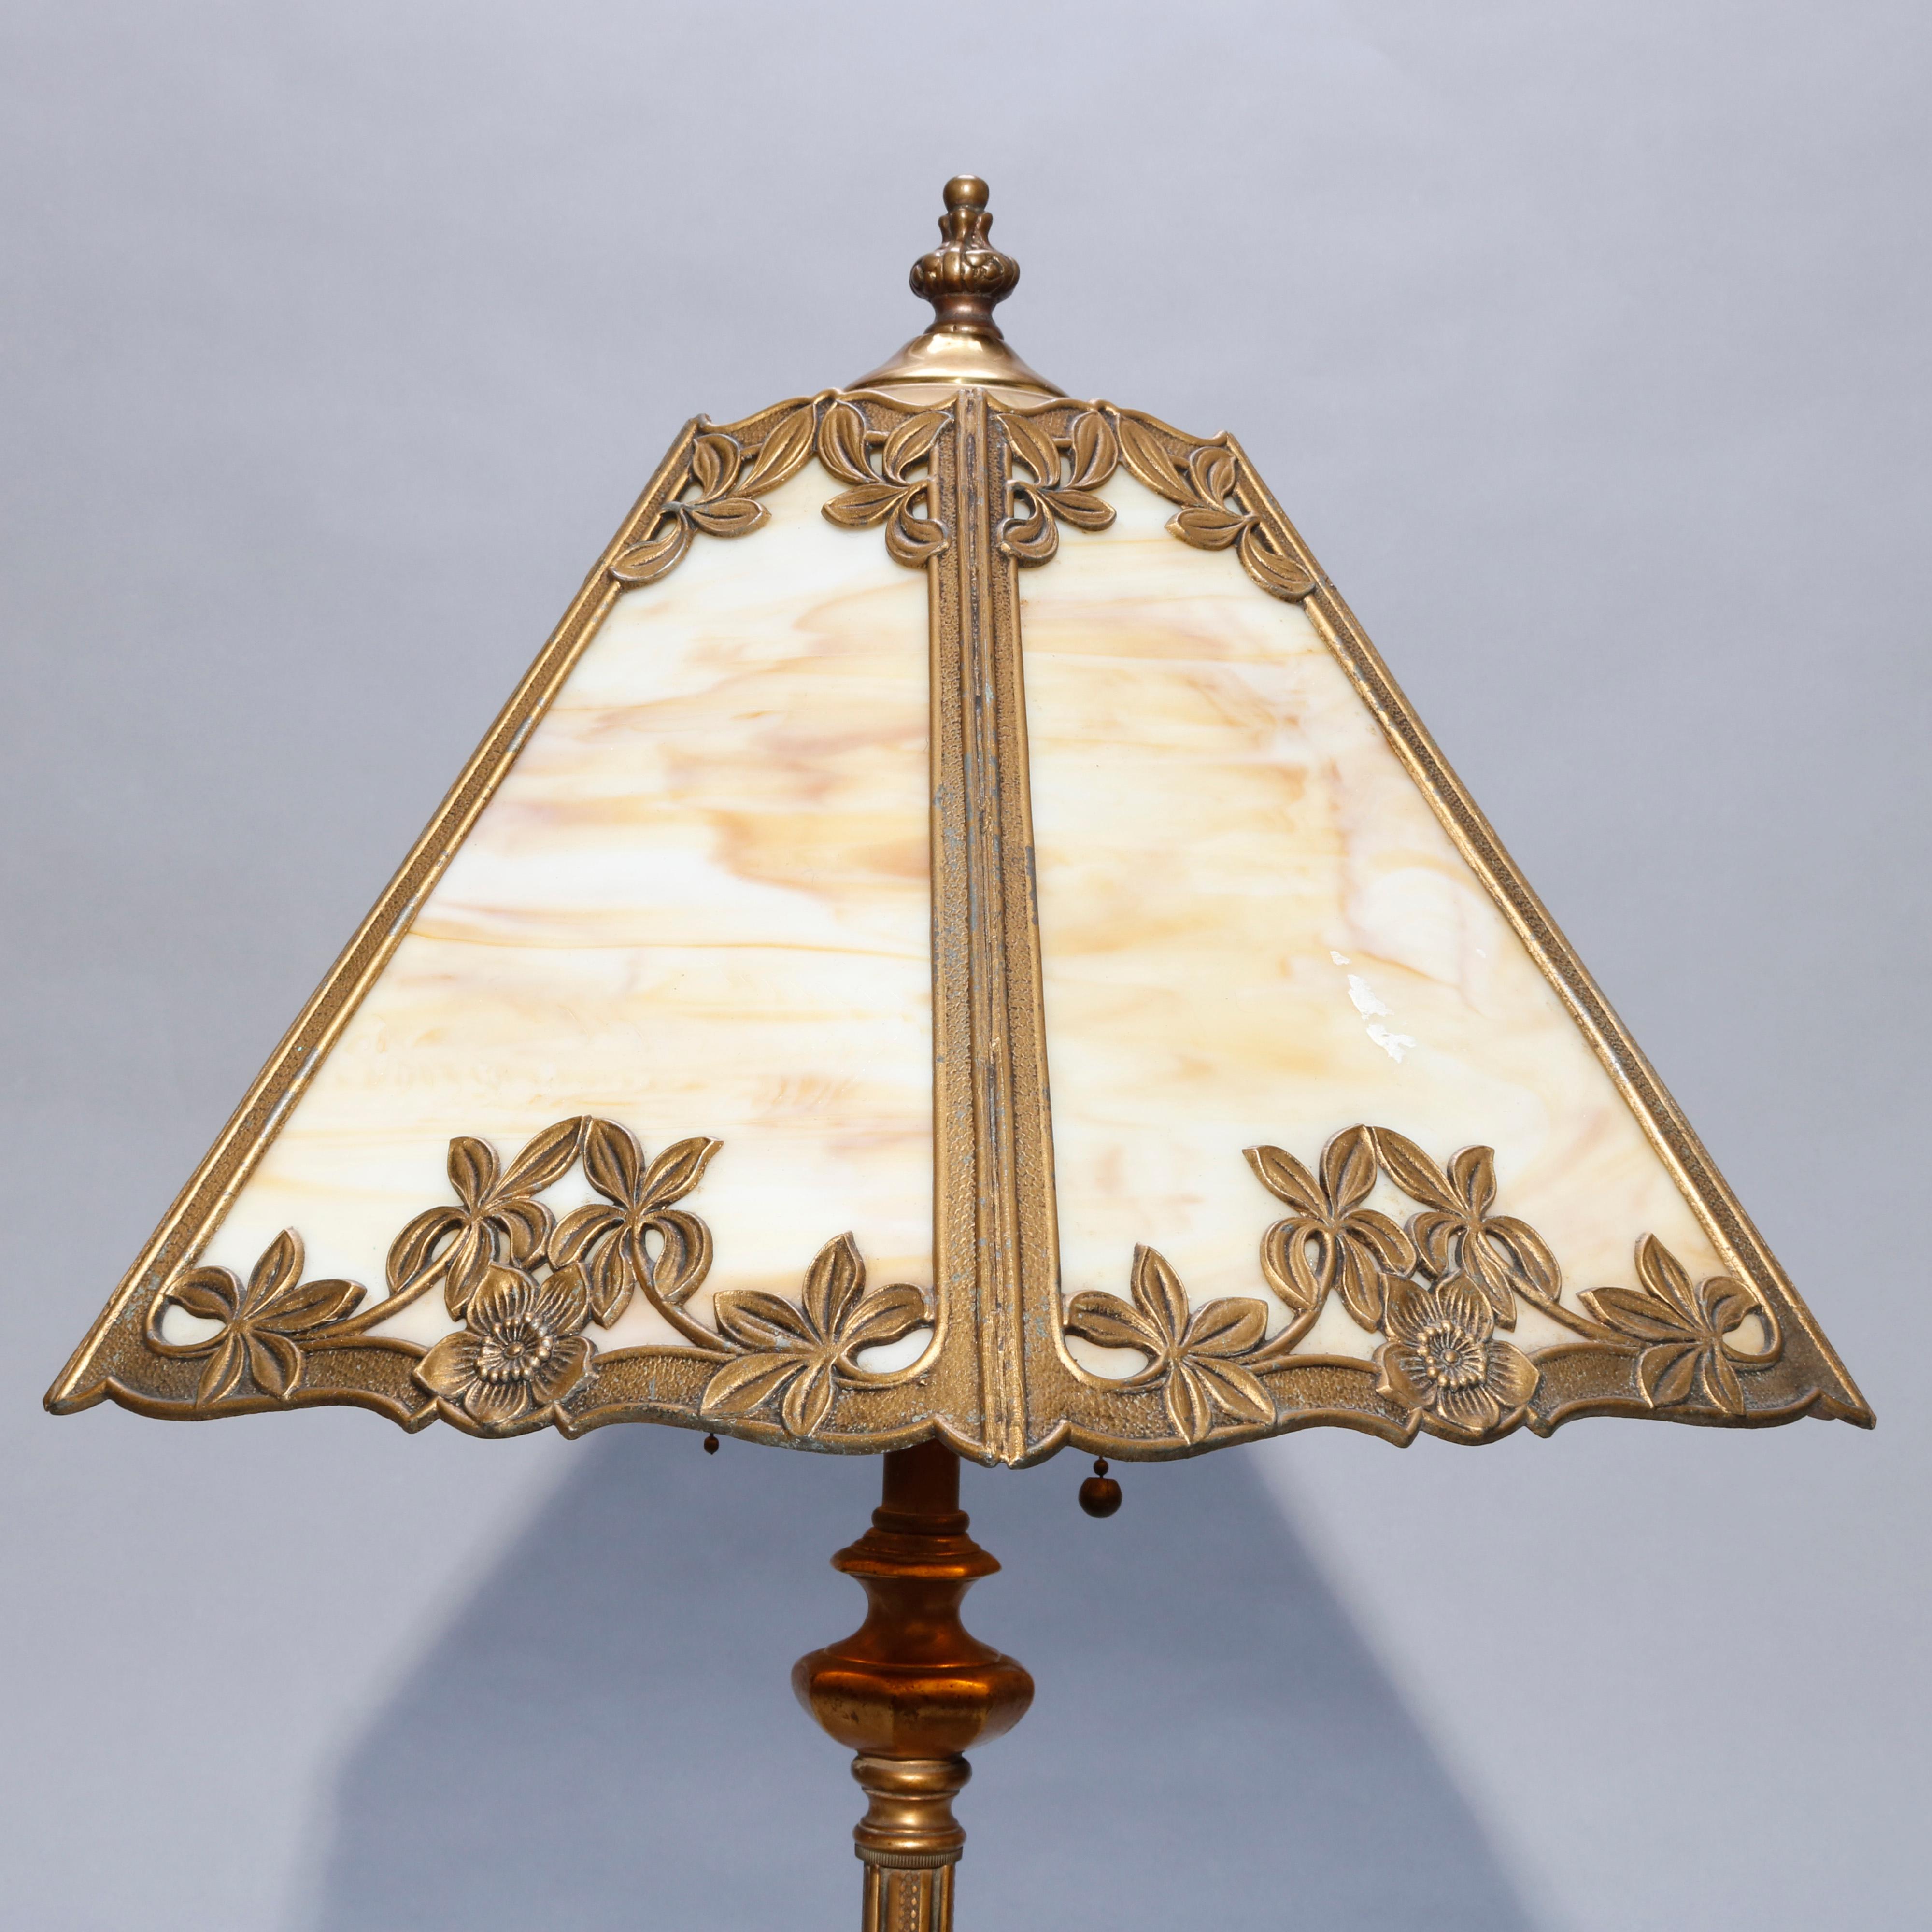 An antique Arts & Crafts table lamp in the manner of Bradley & Hubbard offers cast paneled shade with floral elements housing slag glass panels and surmounting double socket gilt base, circa 1920

Measures- 24